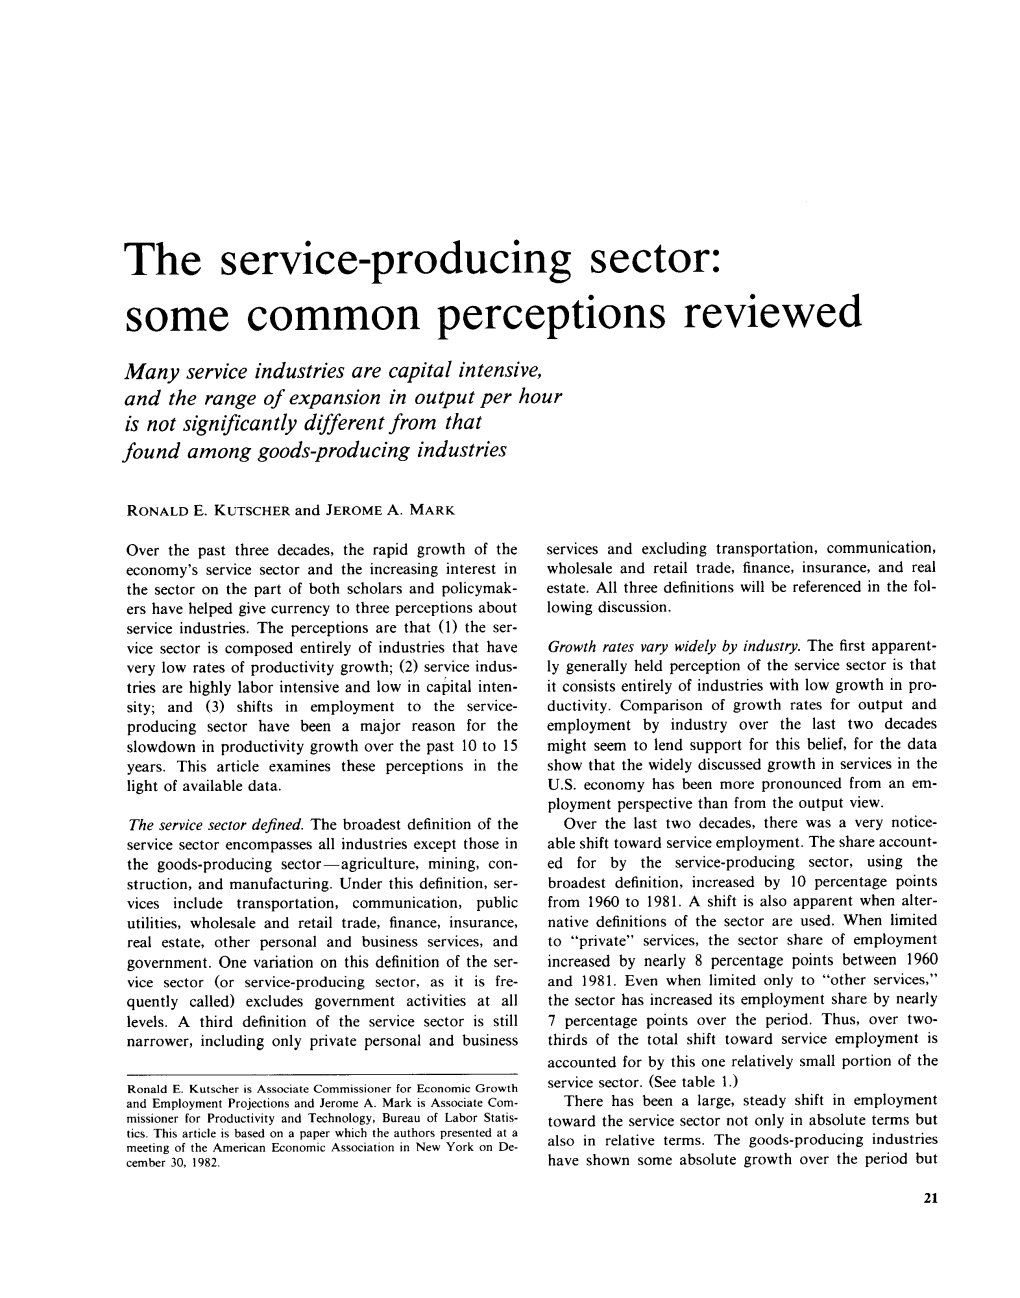 The Service-Producing Sector